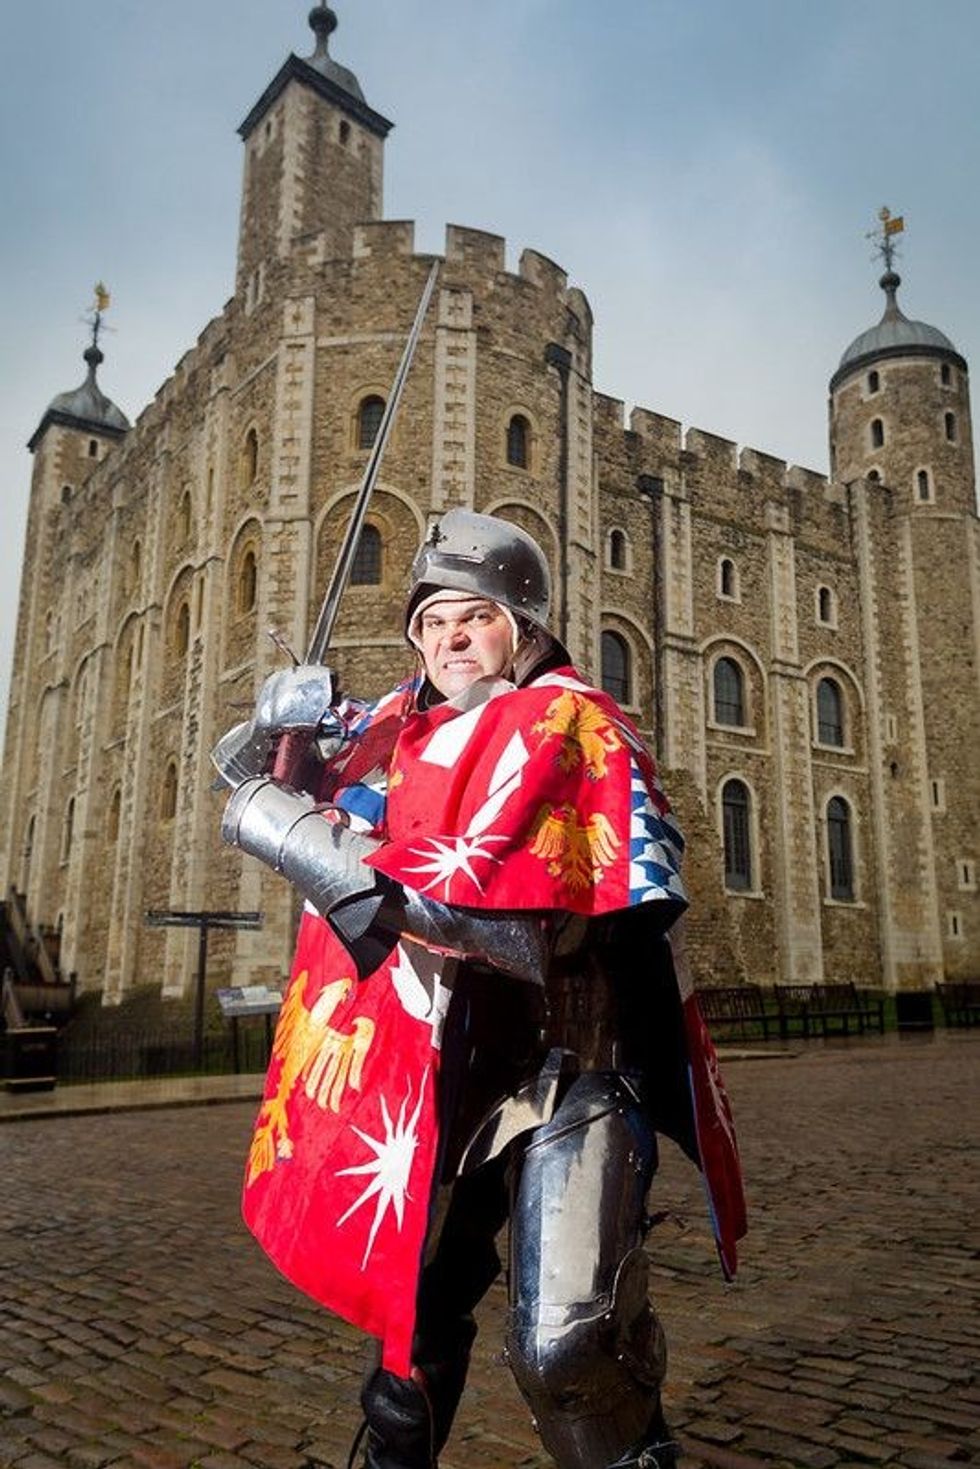 Sword-wielding knight strikes a pose with a medieval-era building in the background